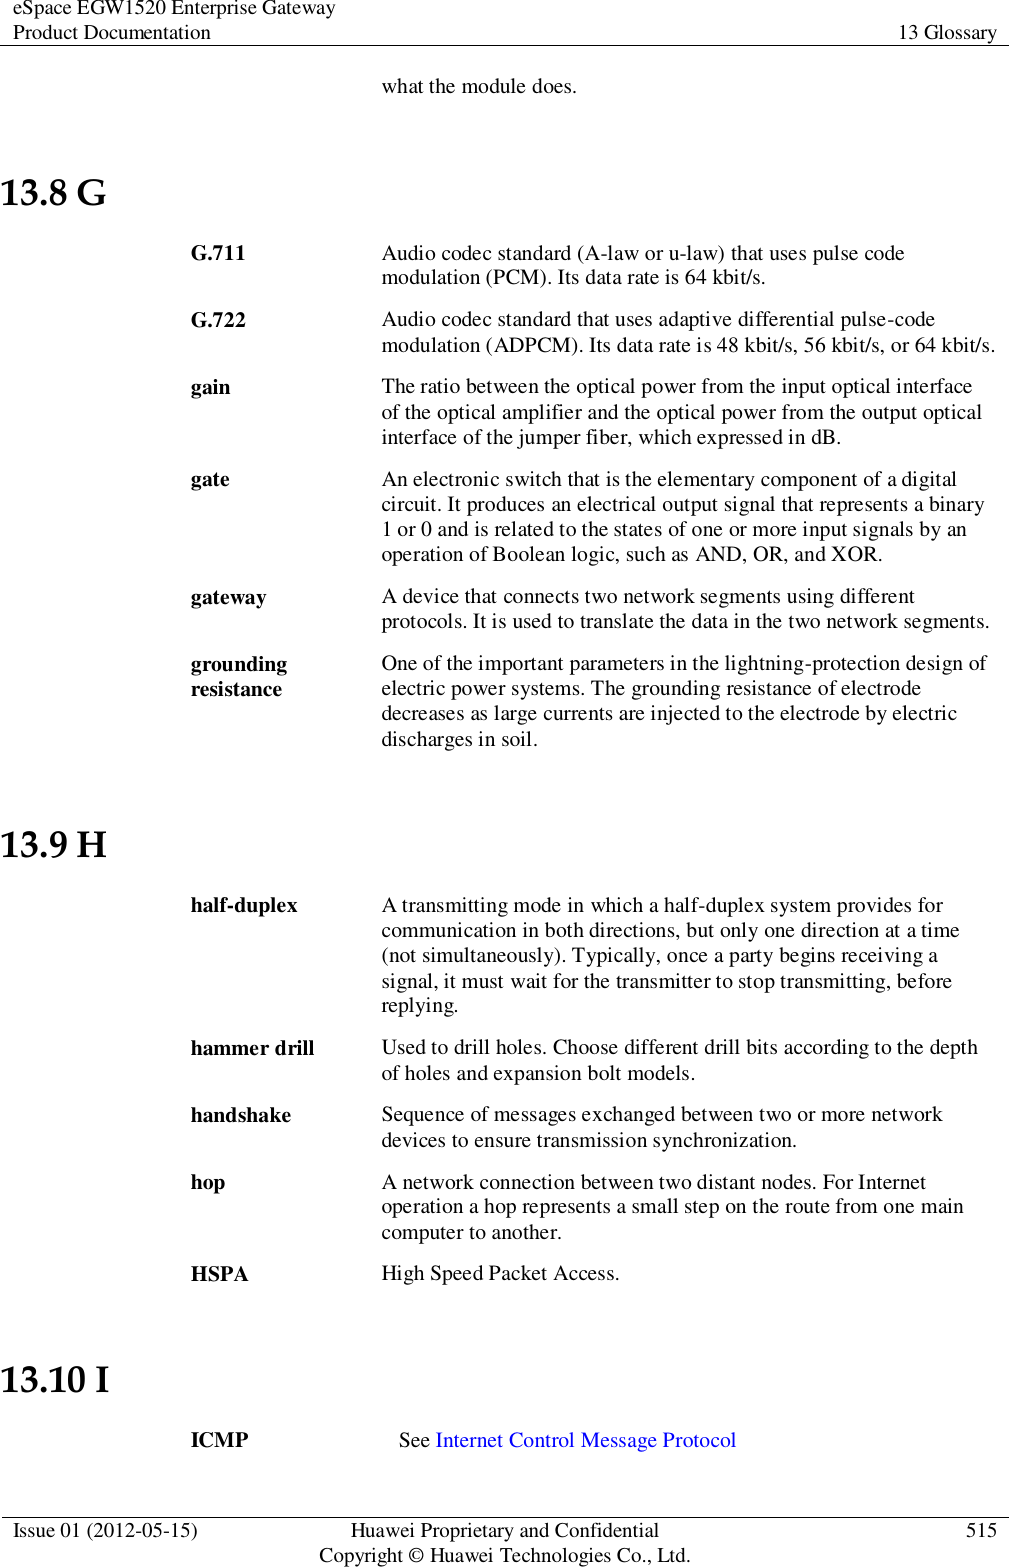 eSpace EGW1520 Enterprise Gateway Product Documentation 13 Glossary  Issue 01 (2012-05-15) Huawei Proprietary and Confidential                                     Copyright © Huawei Technologies Co., Ltd. 515  what the module does. 13.8 G G.711 Audio codec standard (A-law or u-law) that uses pulse code modulation (PCM). Its data rate is 64 kbit/s. G.722 Audio codec standard that uses adaptive differential pulse-code modulation (ADPCM). Its data rate is 48 kbit/s, 56 kbit/s, or 64 kbit/s. gain The ratio between the optical power from the input optical interface of the optical amplifier and the optical power from the output optical interface of the jumper fiber, which expressed in dB. gate An electronic switch that is the elementary component of a digital circuit. It produces an electrical output signal that represents a binary 1 or 0 and is related to the states of one or more input signals by an operation of Boolean logic, such as AND, OR, and XOR. gateway A device that connects two network segments using different protocols. It is used to translate the data in the two network segments. grounding resistance One of the important parameters in the lightning-protection design of electric power systems. The grounding resistance of electrode decreases as large currents are injected to the electrode by electric discharges in soil. 13.9 H half-duplex A transmitting mode in which a half-duplex system provides for communication in both directions, but only one direction at a time (not simultaneously). Typically, once a party begins receiving a signal, it must wait for the transmitter to stop transmitting, before replying. hammer drill Used to drill holes. Choose different drill bits according to the depth of holes and expansion bolt models. handshake Sequence of messages exchanged between two or more network devices to ensure transmission synchronization. hop A network connection between two distant nodes. For Internet operation a hop represents a small step on the route from one main computer to another. HSPA High Speed Packet Access. 13.10 I ICMP See Internet Control Message Protocol 